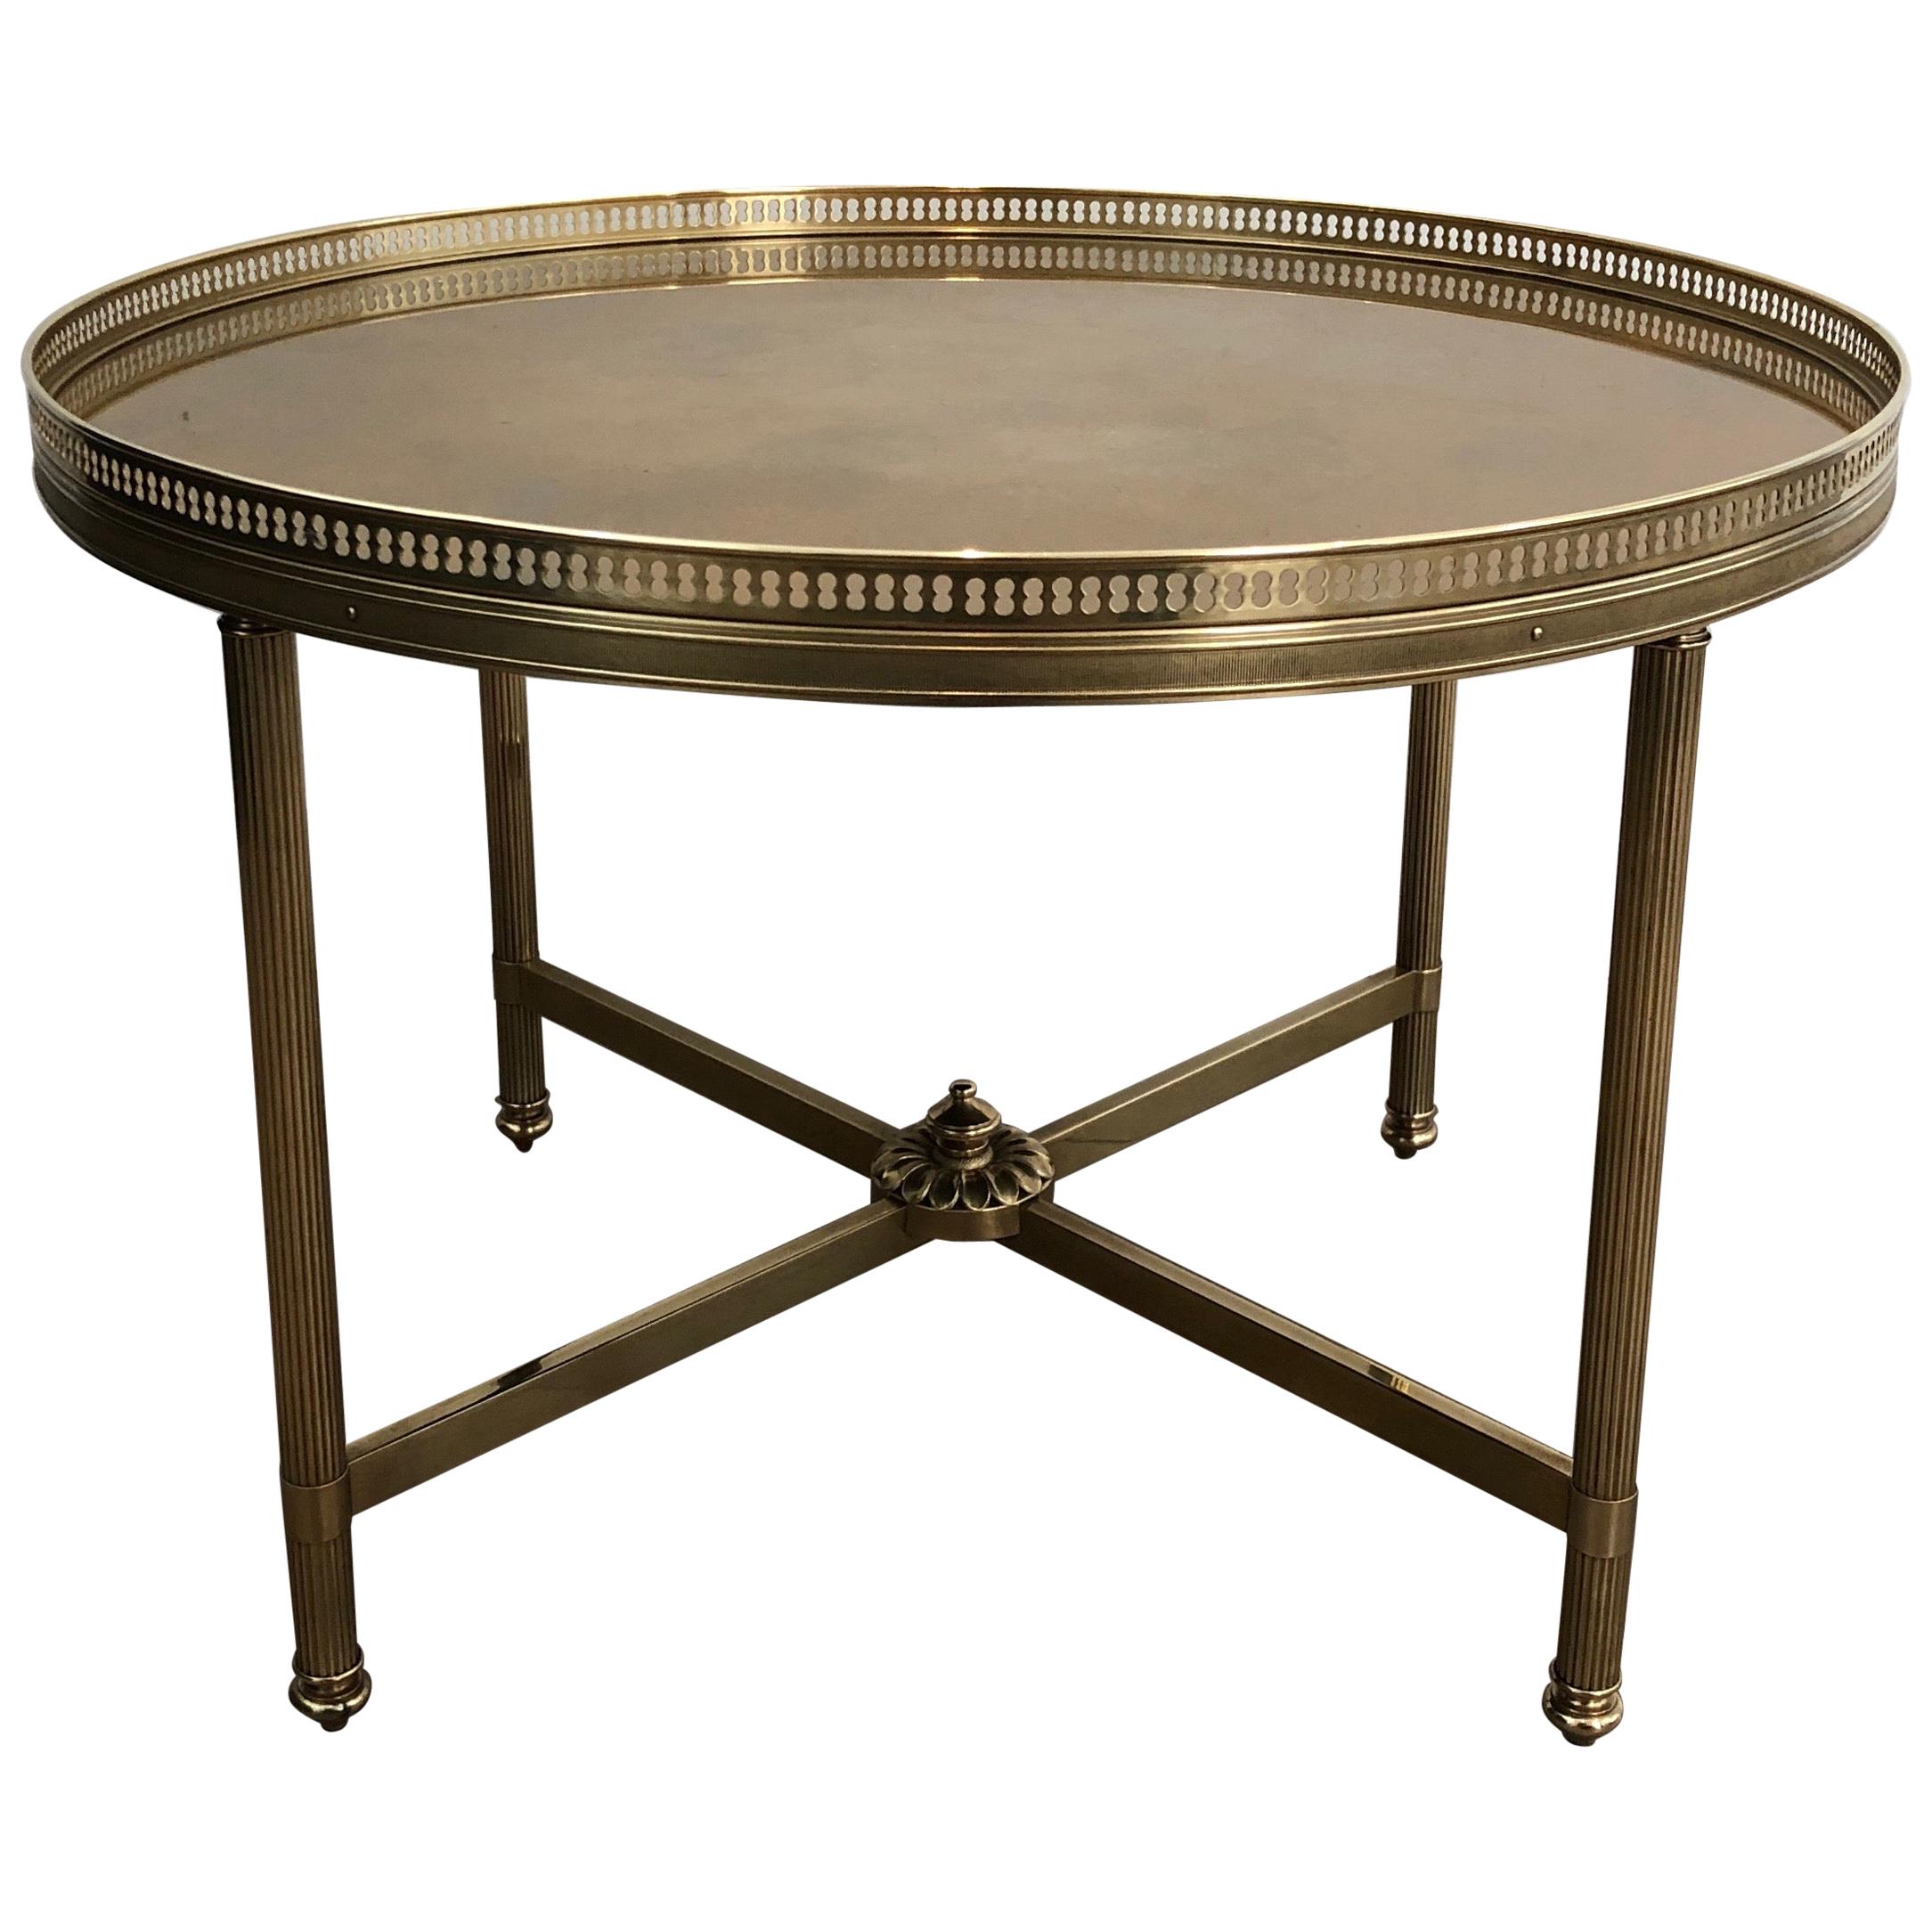 Maison Jansen, Neoclassical Style Small Round Brass Coffee Table with Gold Top